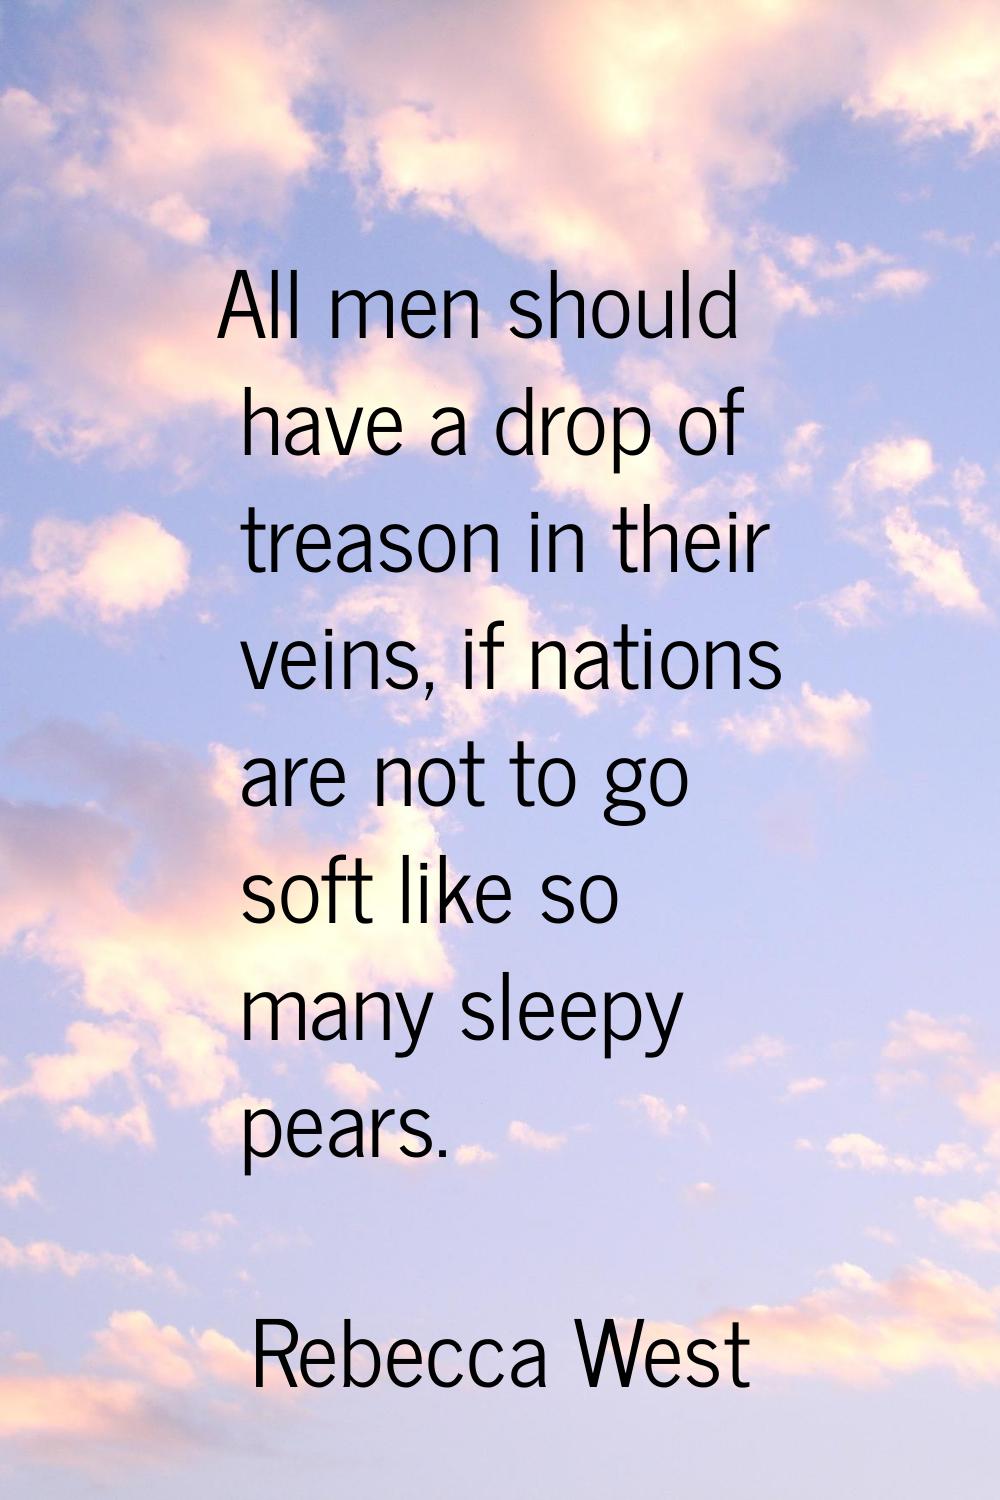 All men should have a drop of treason in their veins, if nations are not to go soft like so many sl